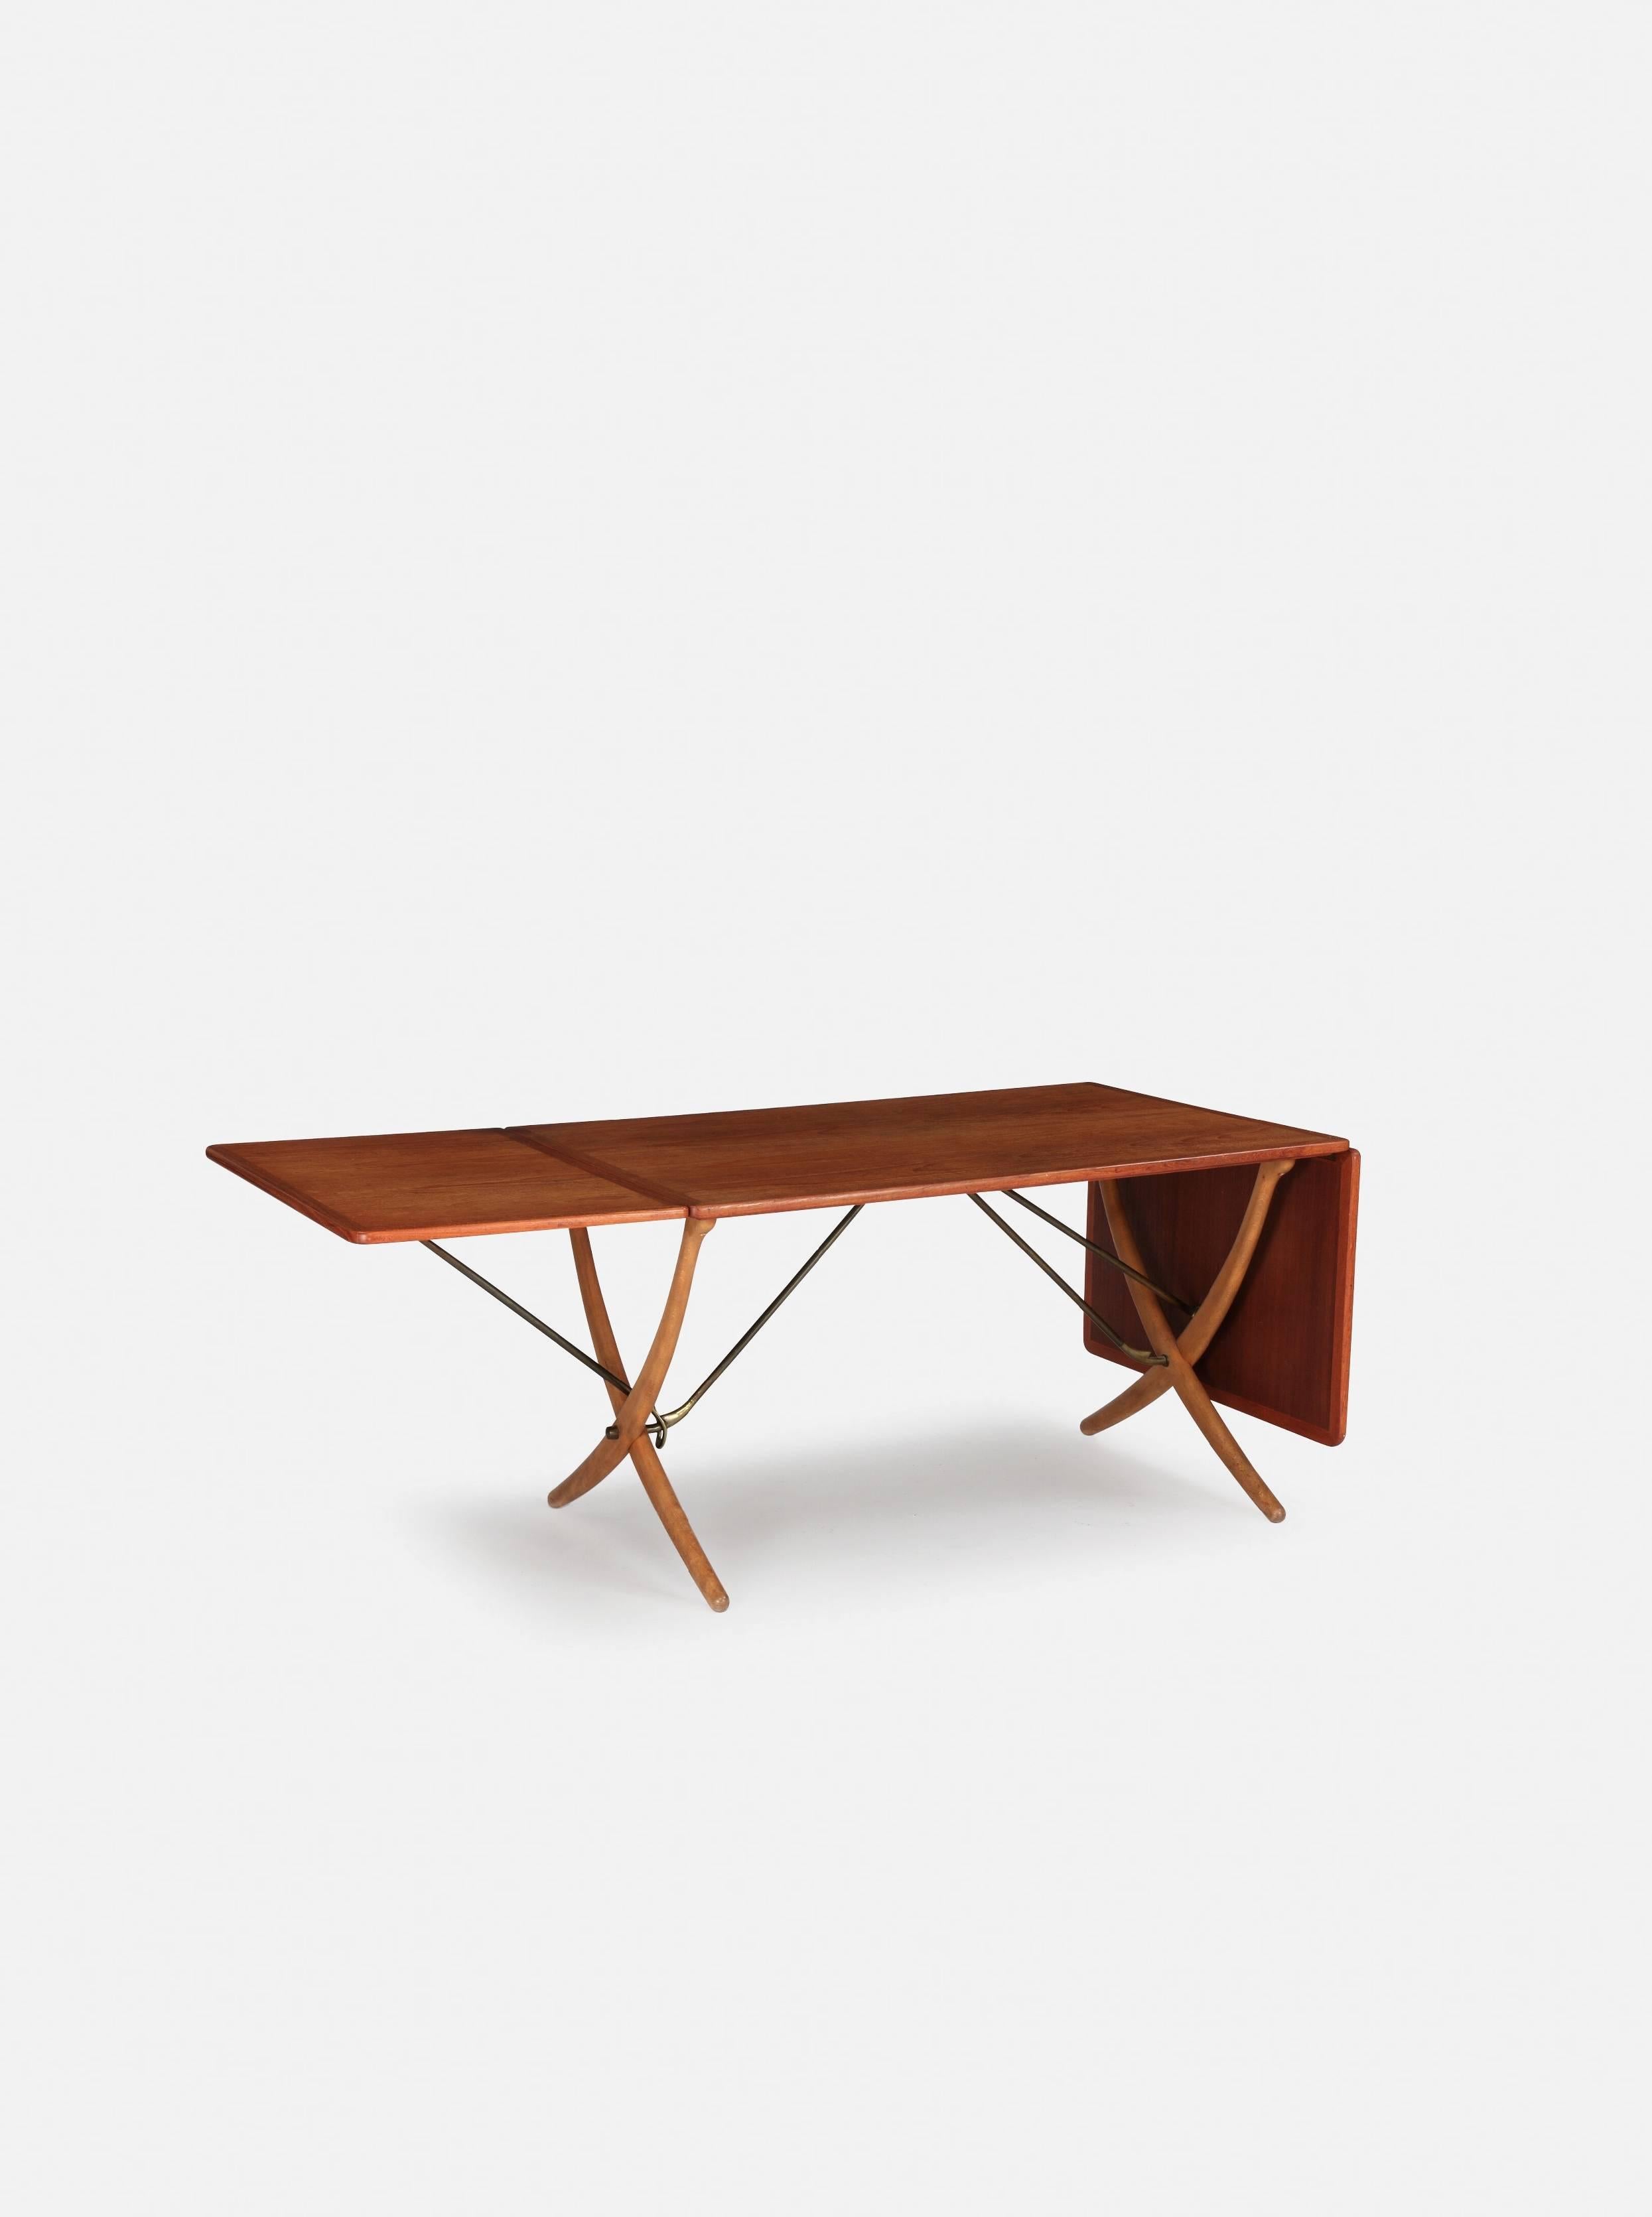 Hans Wegner AT 304 dining table, made by Andreas Tuck in Denmark, 1960s.
Teak with beech cross legs and brass bars. Two flip up / extendable leaves. Length is 128cm unextended, 178cm with one leaf up and 238 cm with both leaves extended. Width 86